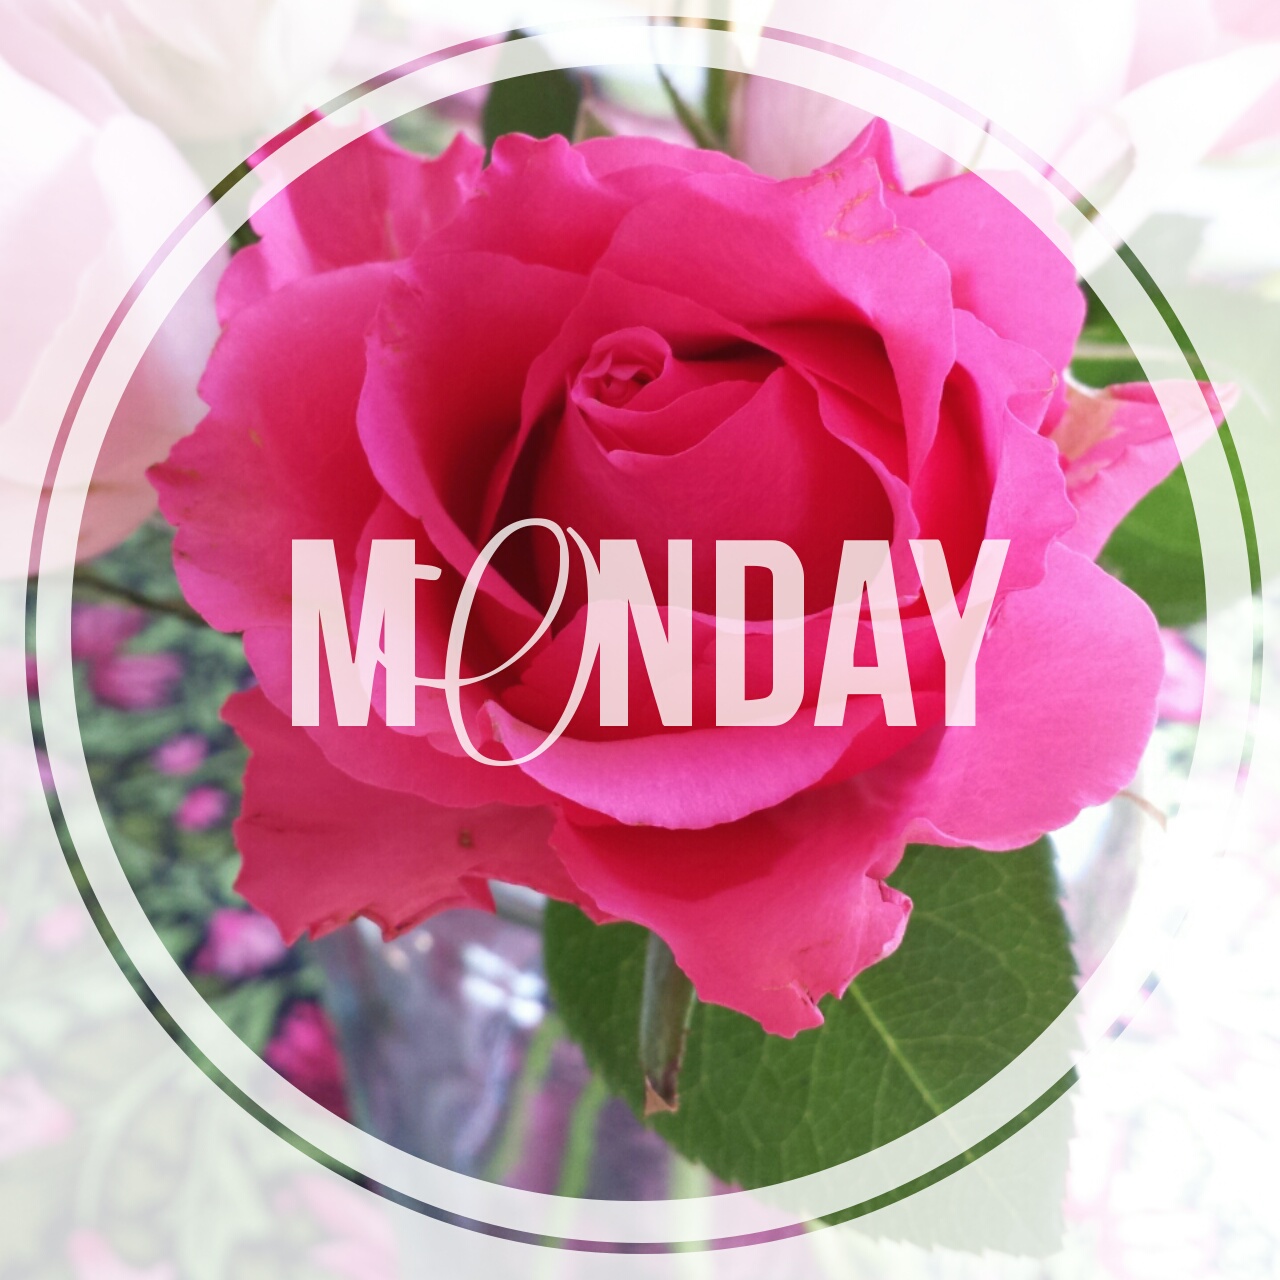 edited in rhonna designs app for android, pink rose, monday, dear jessie